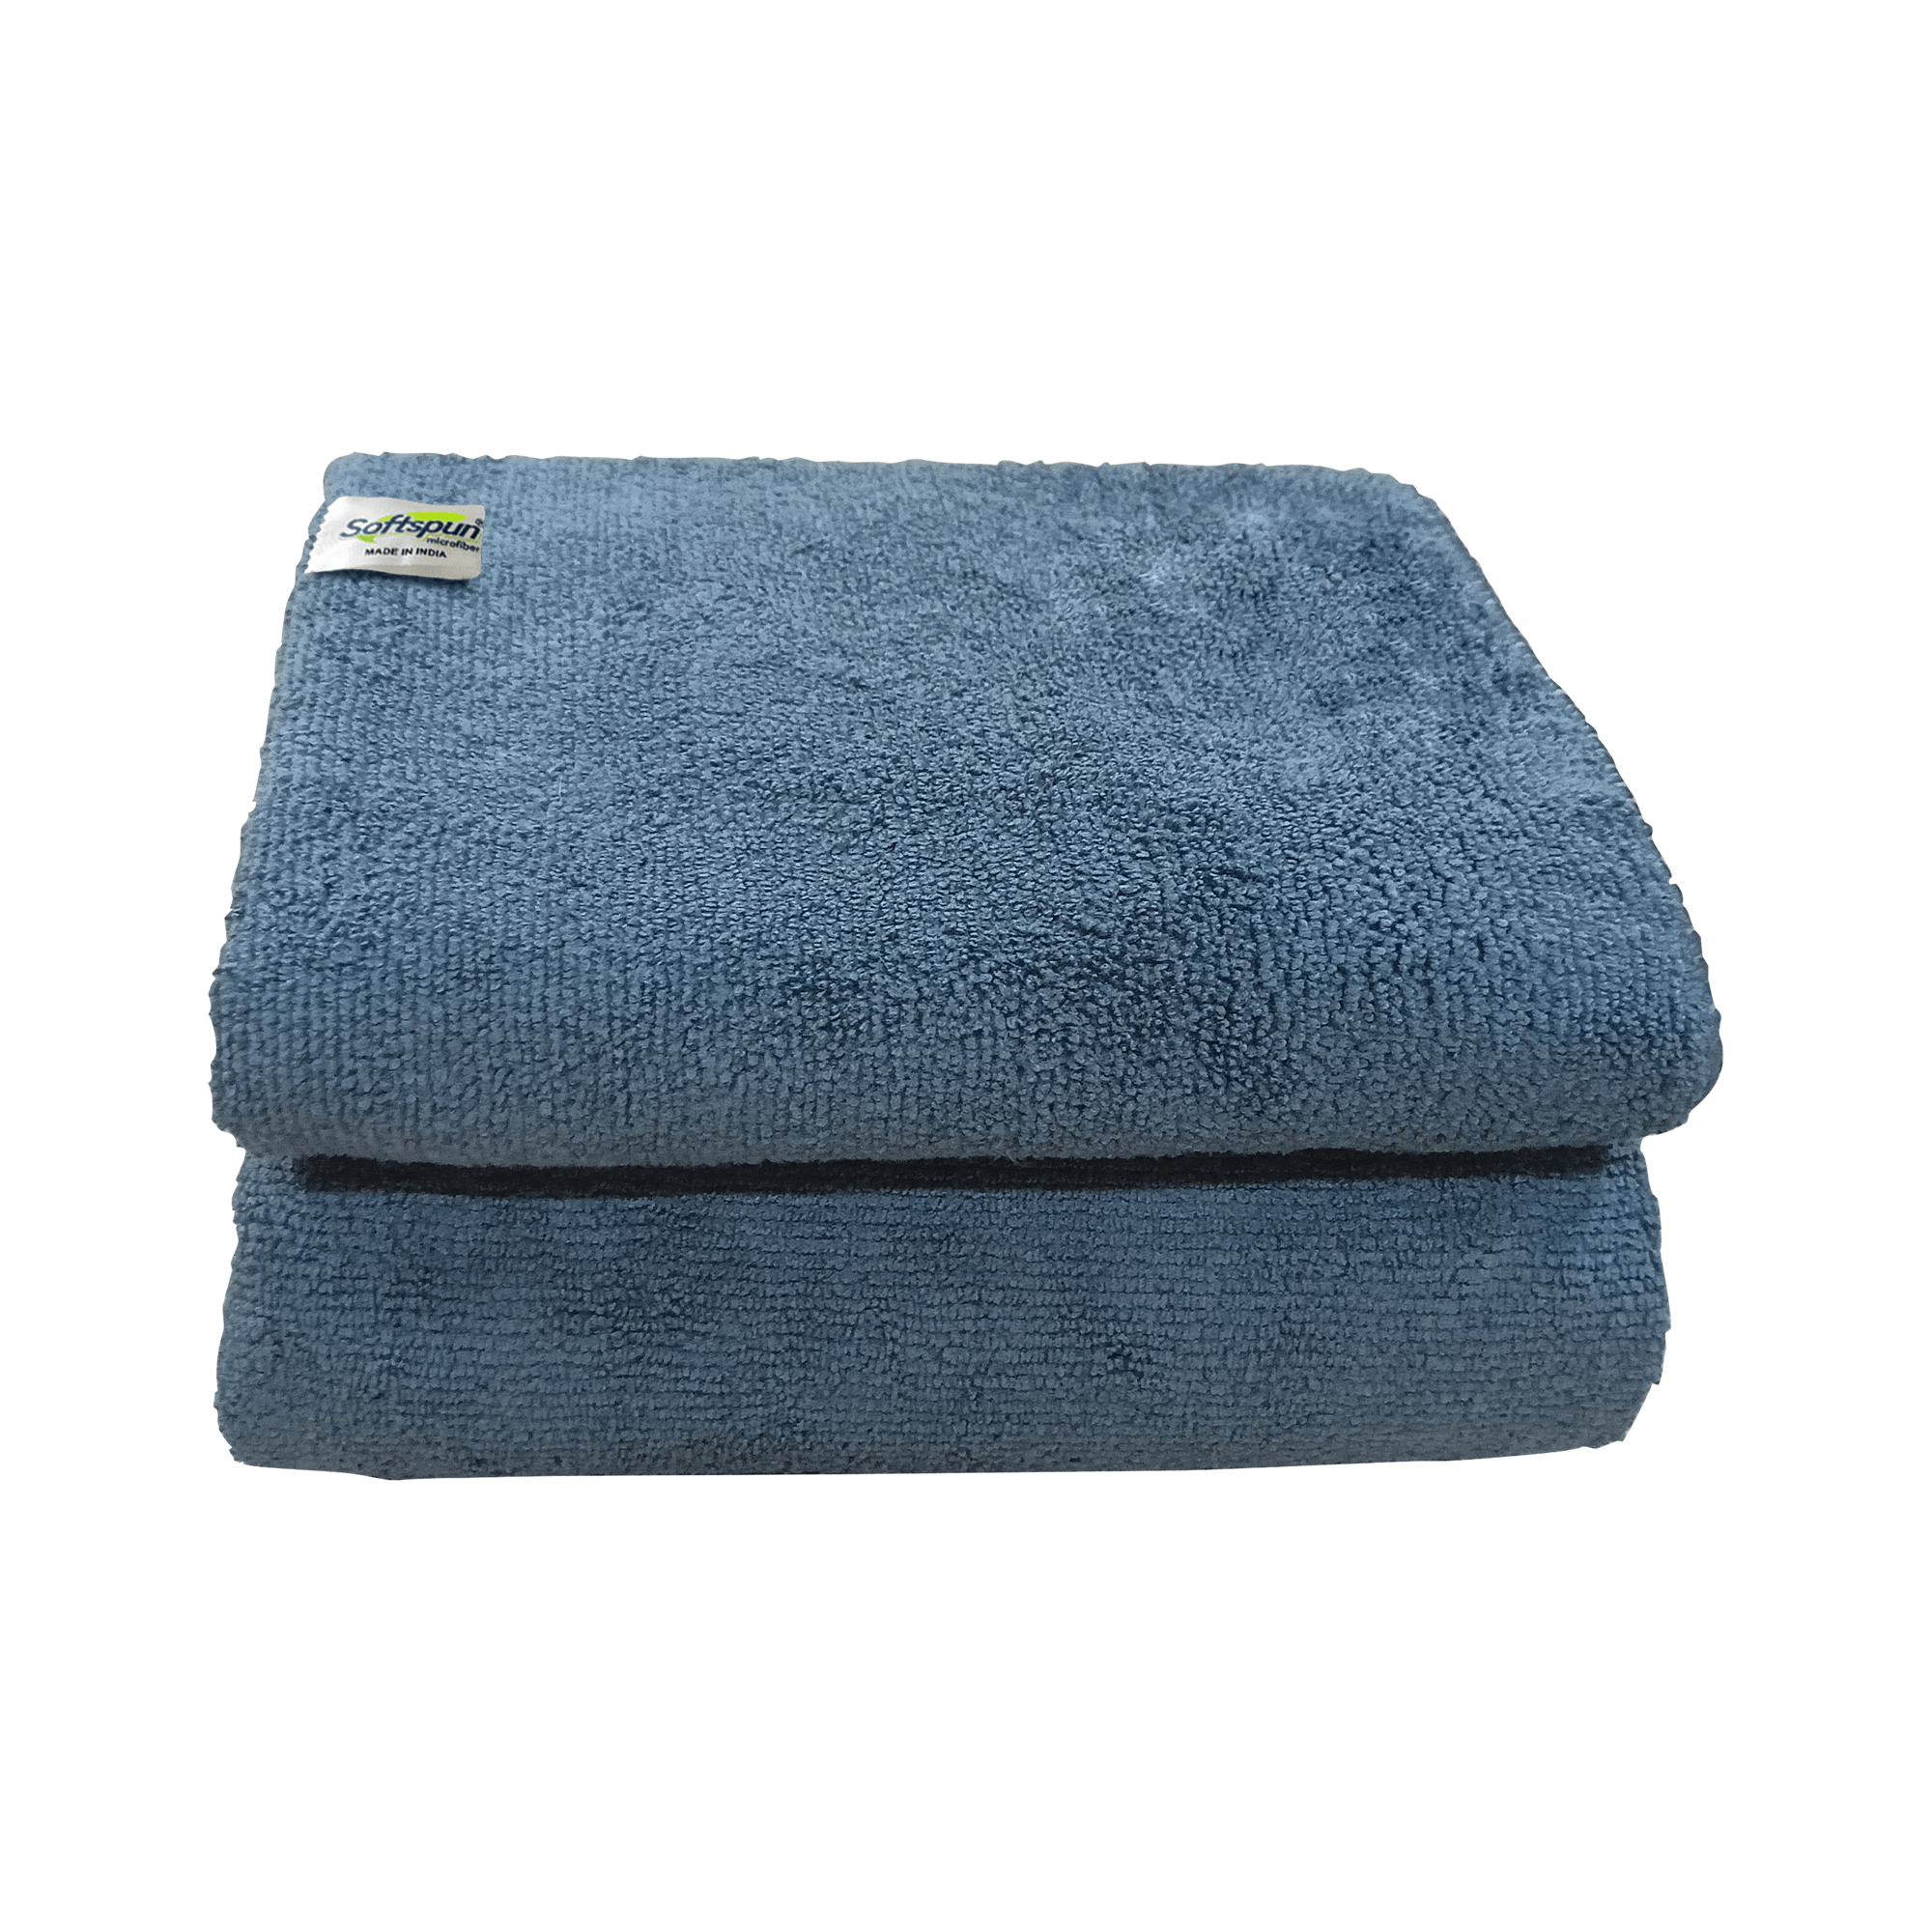 SOFTSPUN Microfiber Baby Face & Bath Towel Set of 2 Pieces, 340 GSM. Super Soft & Comfortable for Newborn Babies, Quick Drying, Ultra Absorbent in Large Size.